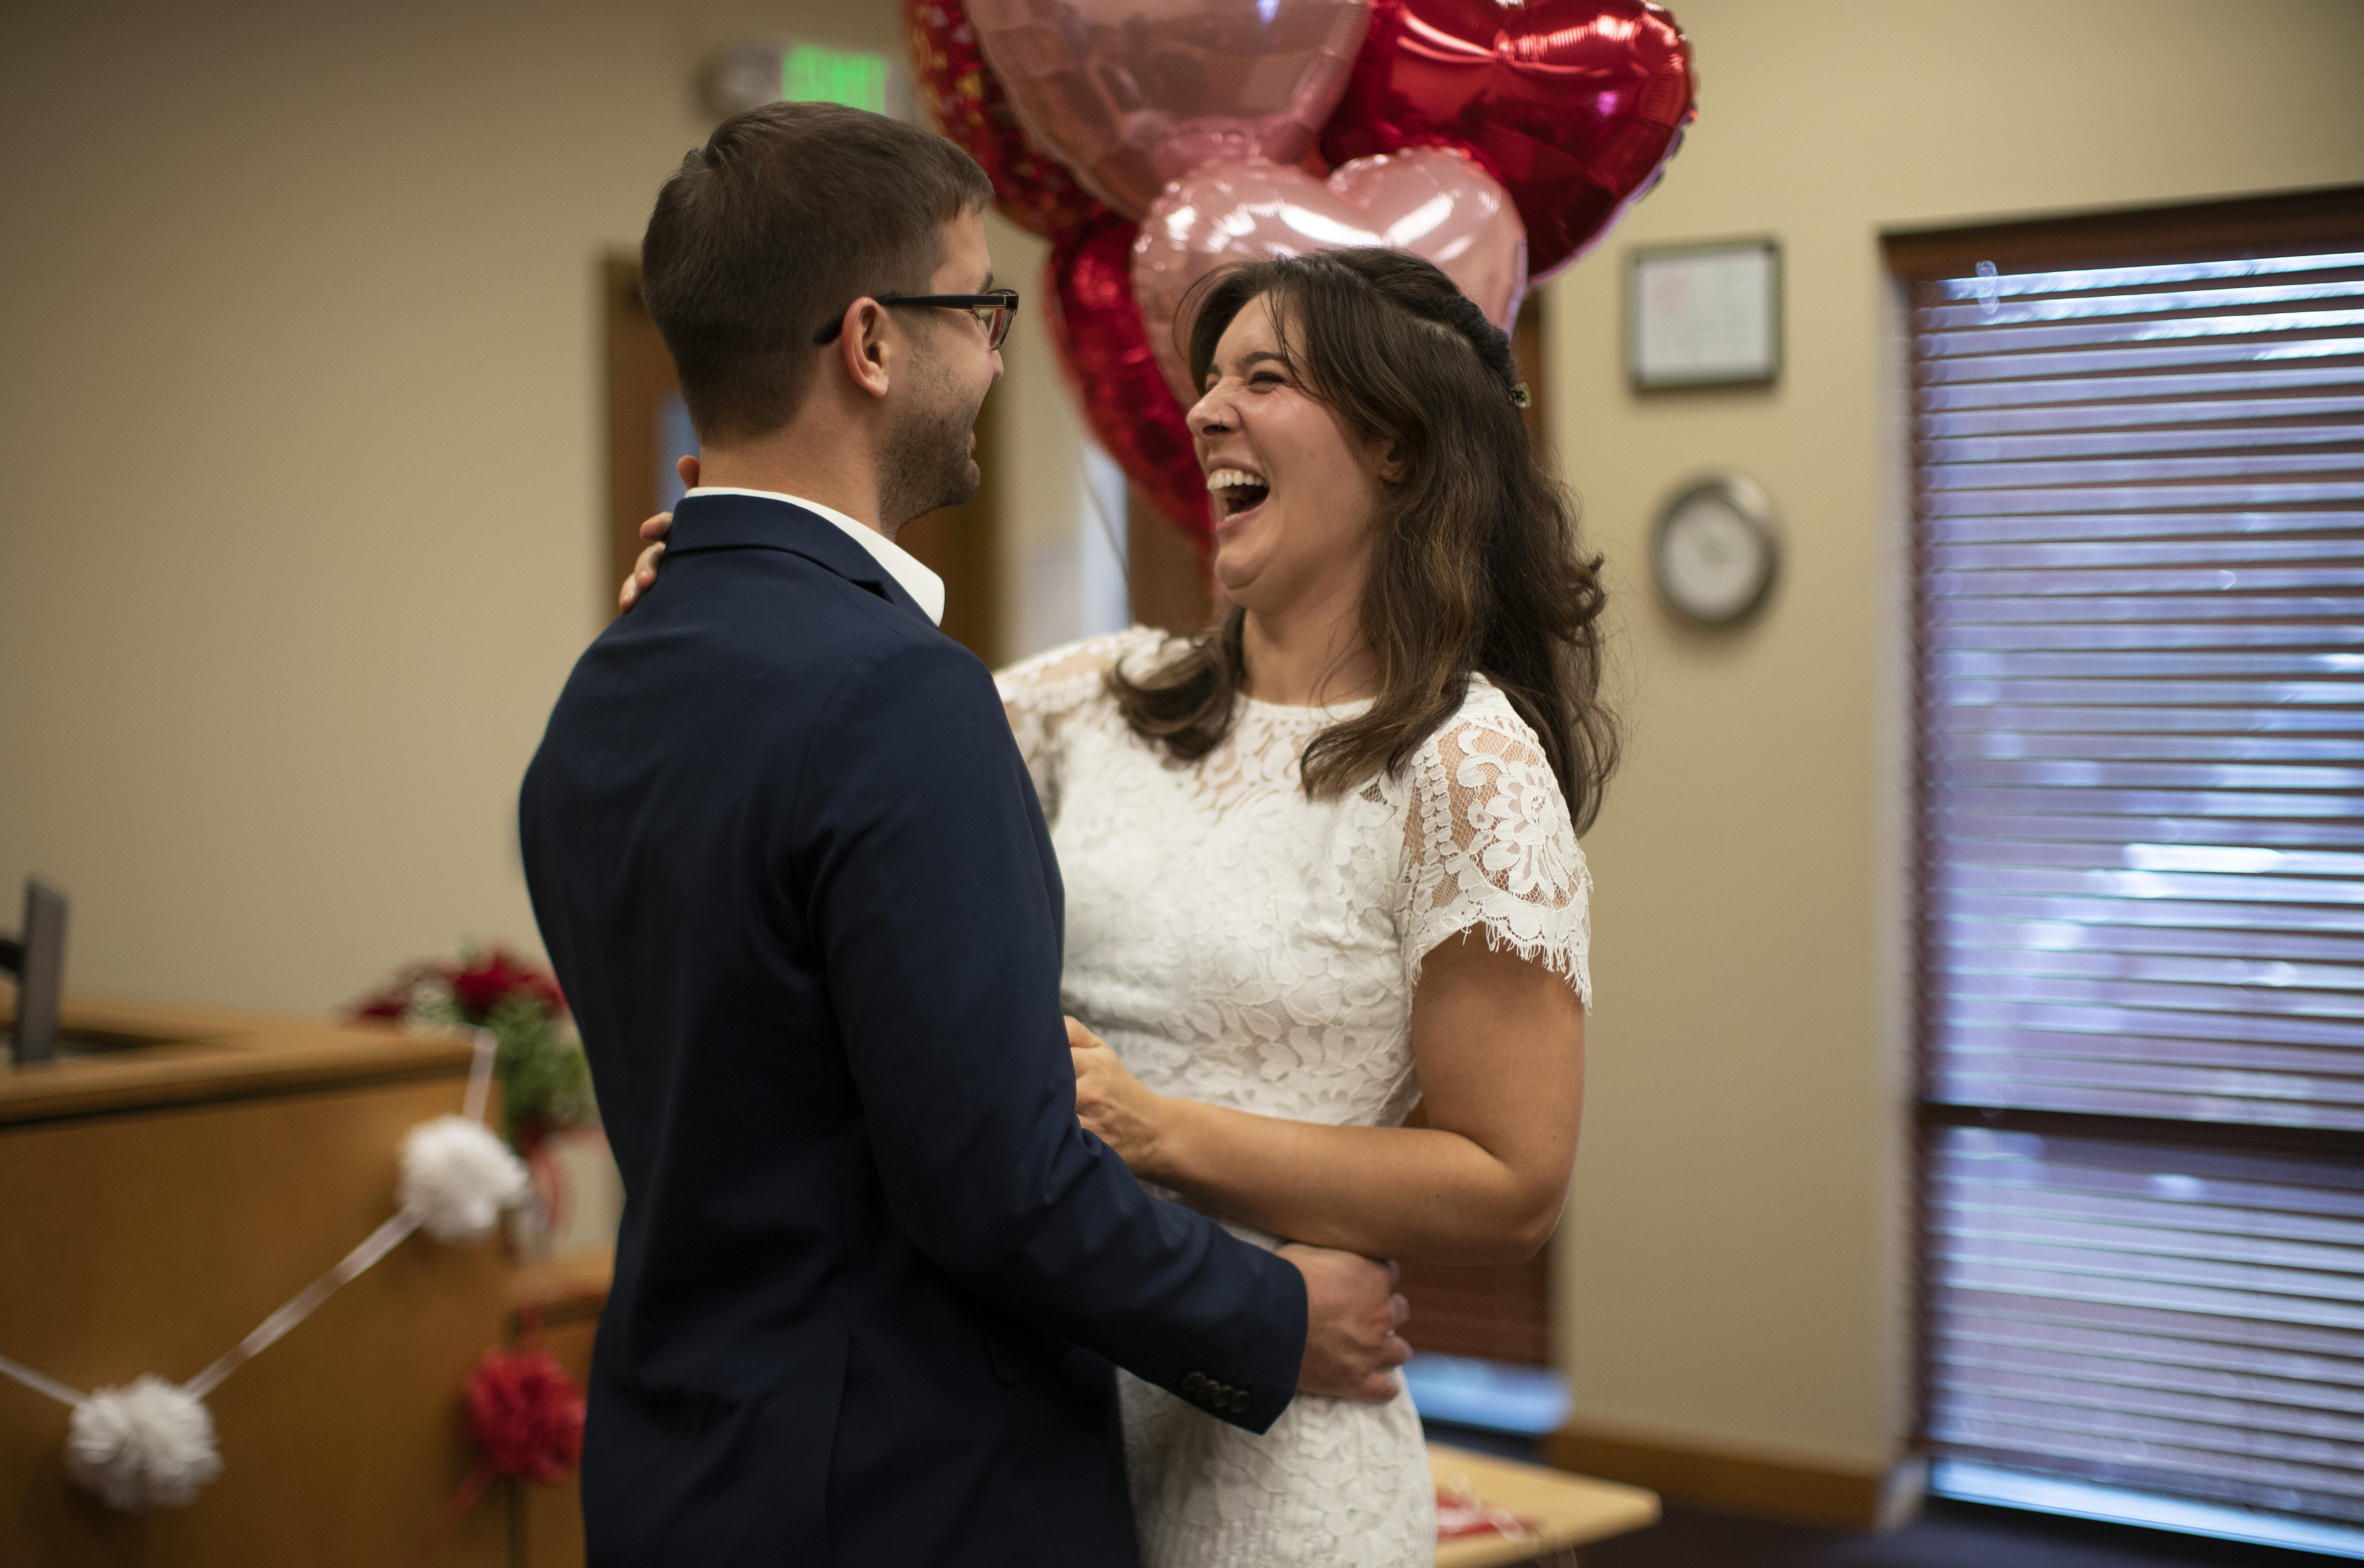 Justice of the Peace Justin Kidd officiated weddings throughout the day at the Marion County Justice Court in Salem, February 14, 2023. Beth Nakamura/The Oregonian